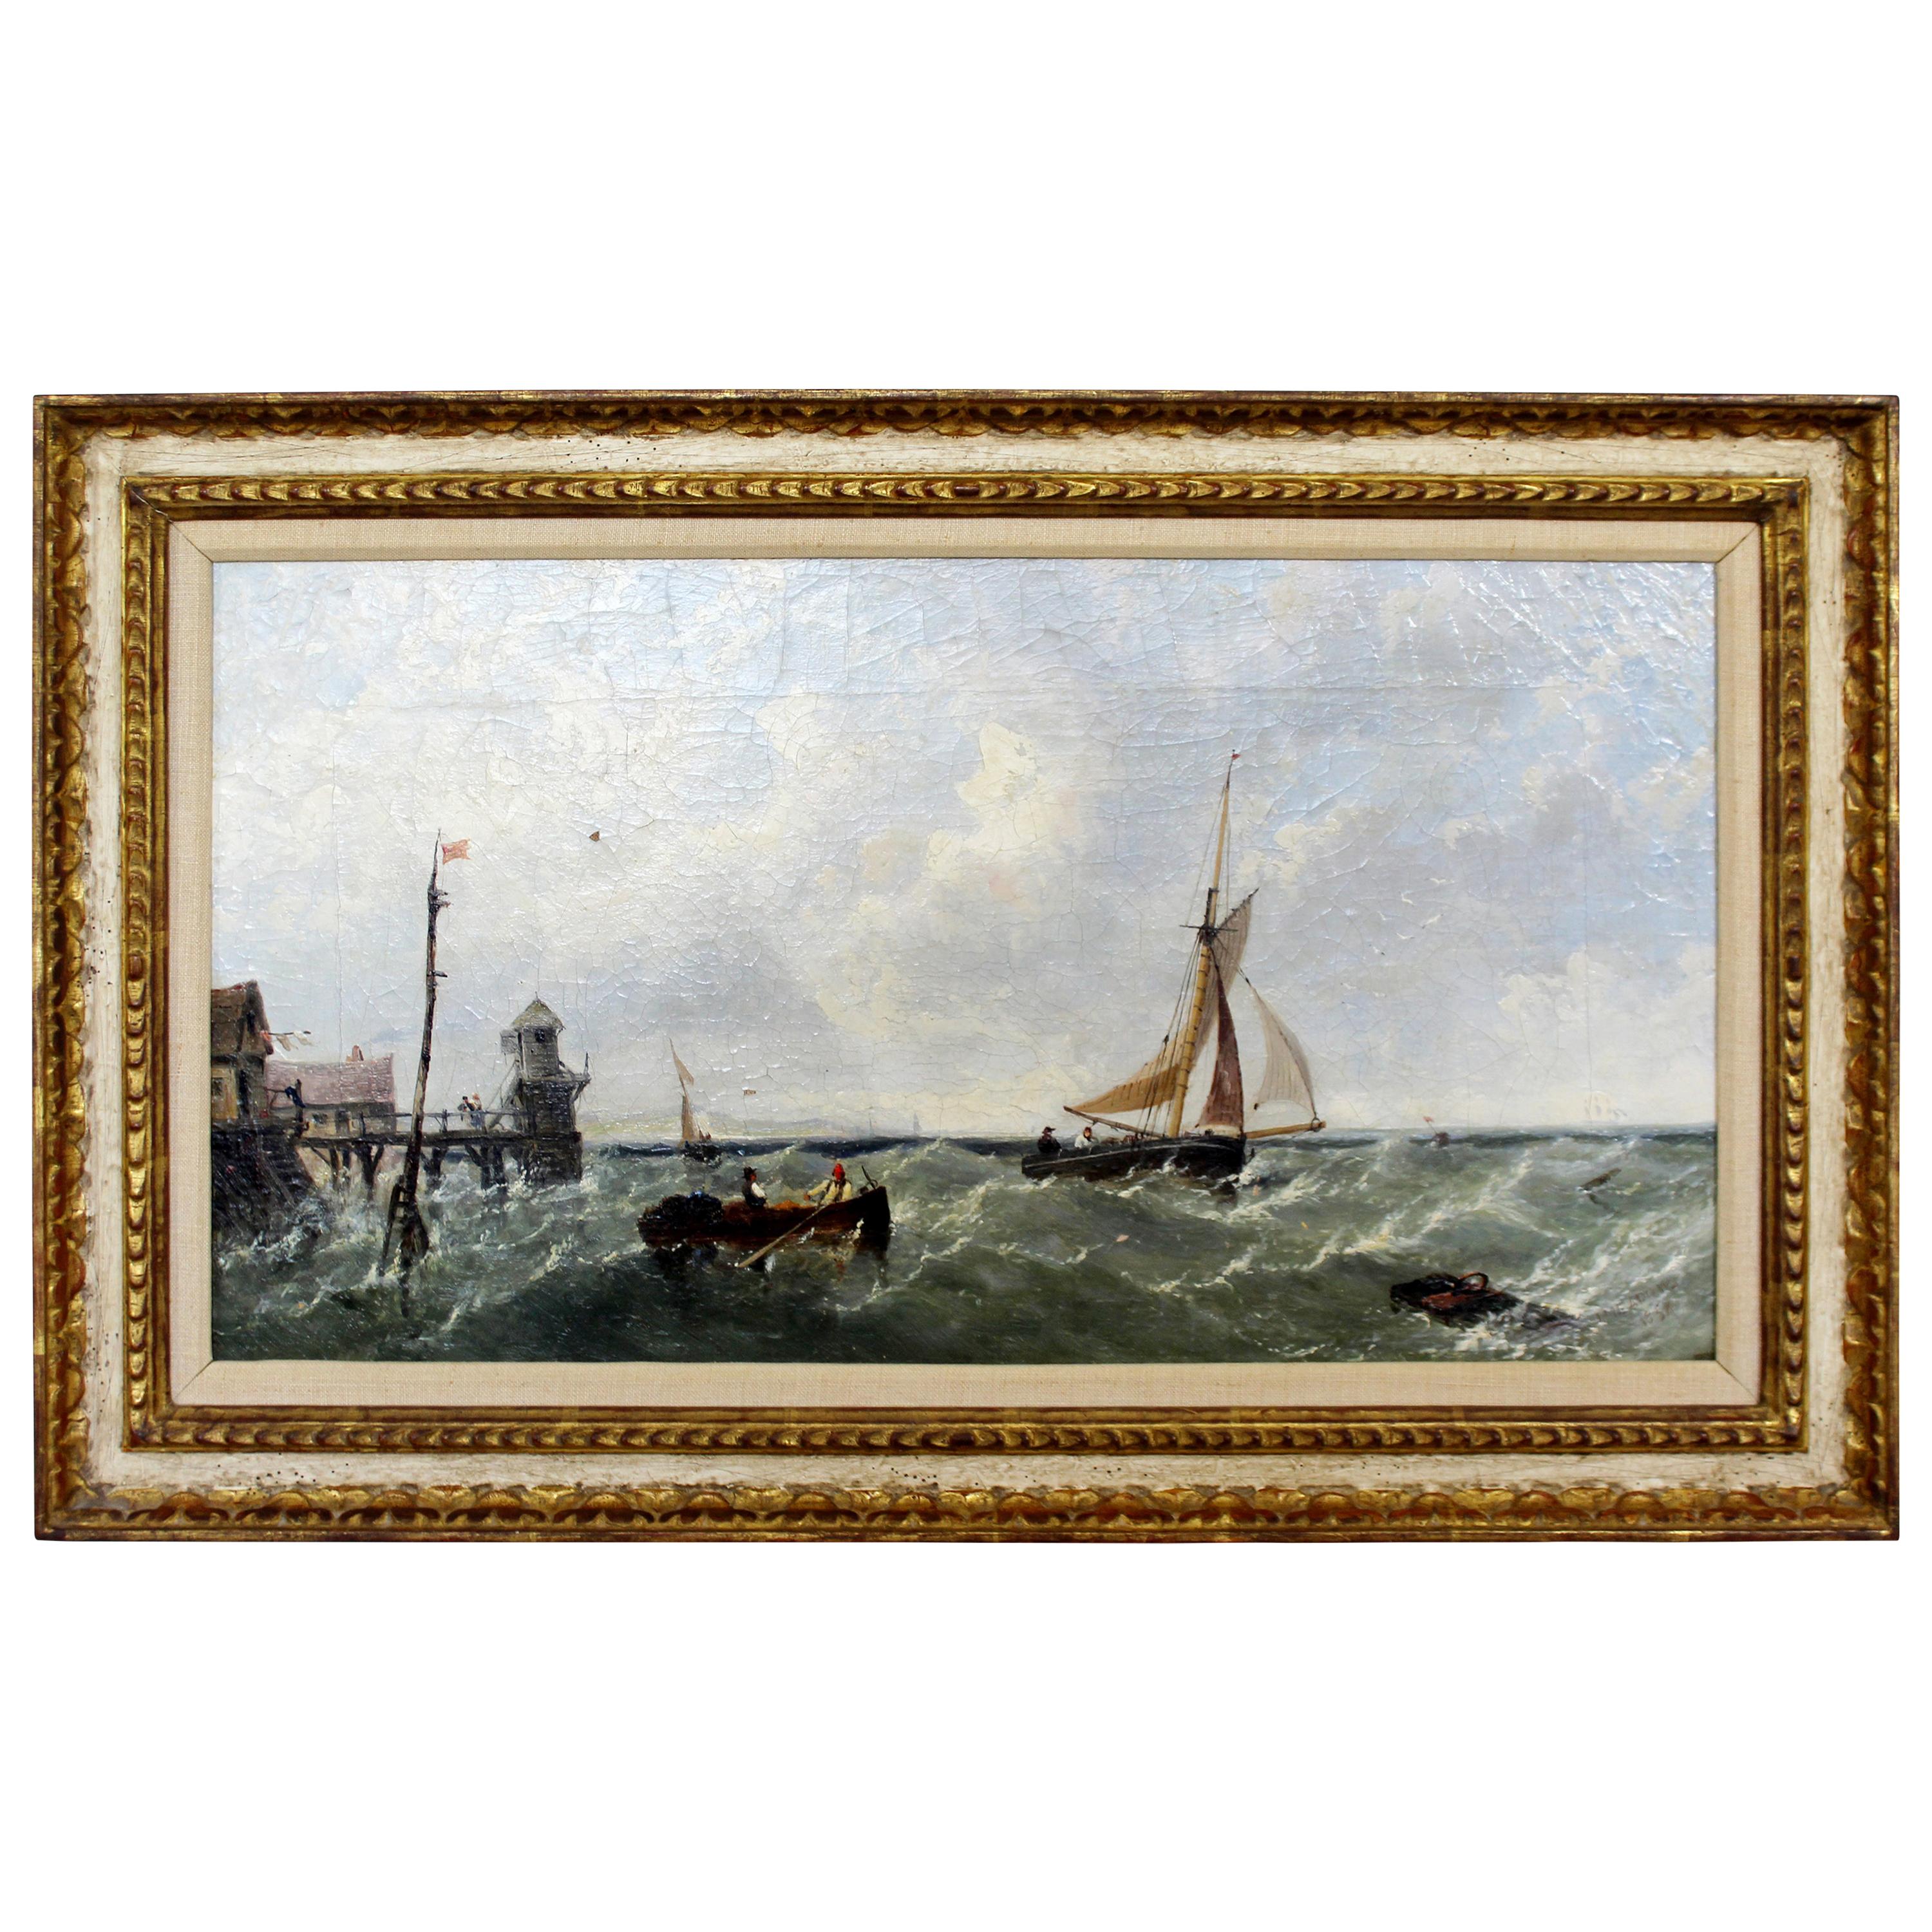 Antique Framed Oil Painting Signed by J. Meadows Nautical Scene Dated 1856 1800s